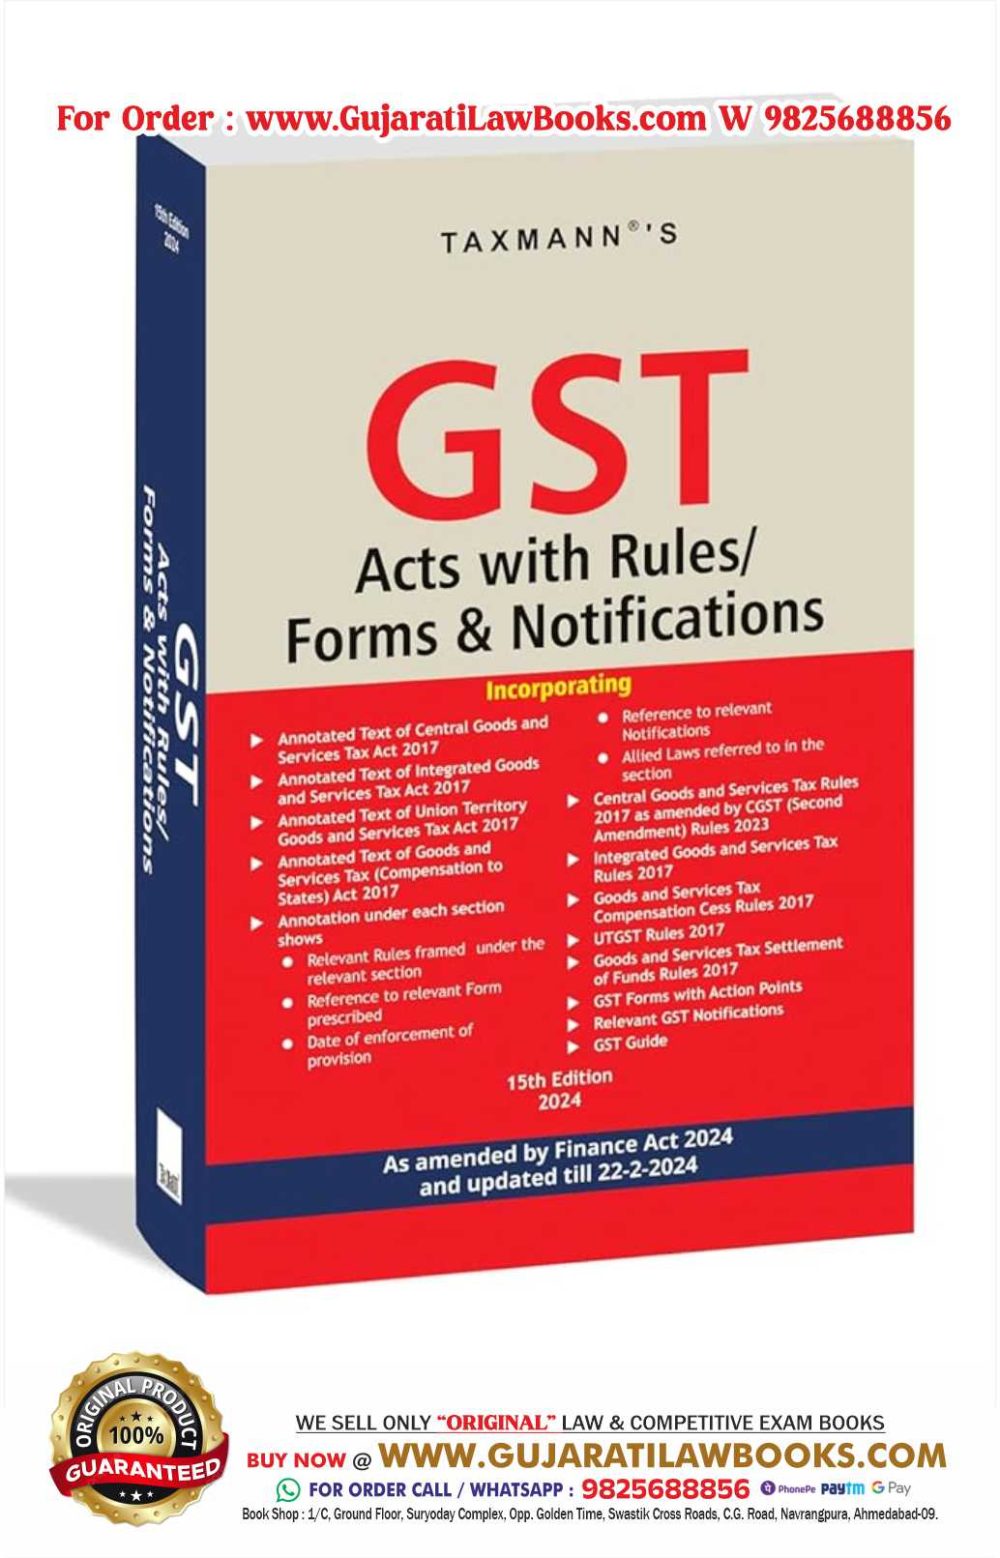 Taxmann's GST Acts with Rules/Forms & Notifications – Covering amended, updated & annotated text of CGST/IGST/UTGST Acts with GST Rules, GST Forms & GST Notifications | [Finance Act 2024] Paperback – 5 March 2024 by Taxmann (Author)